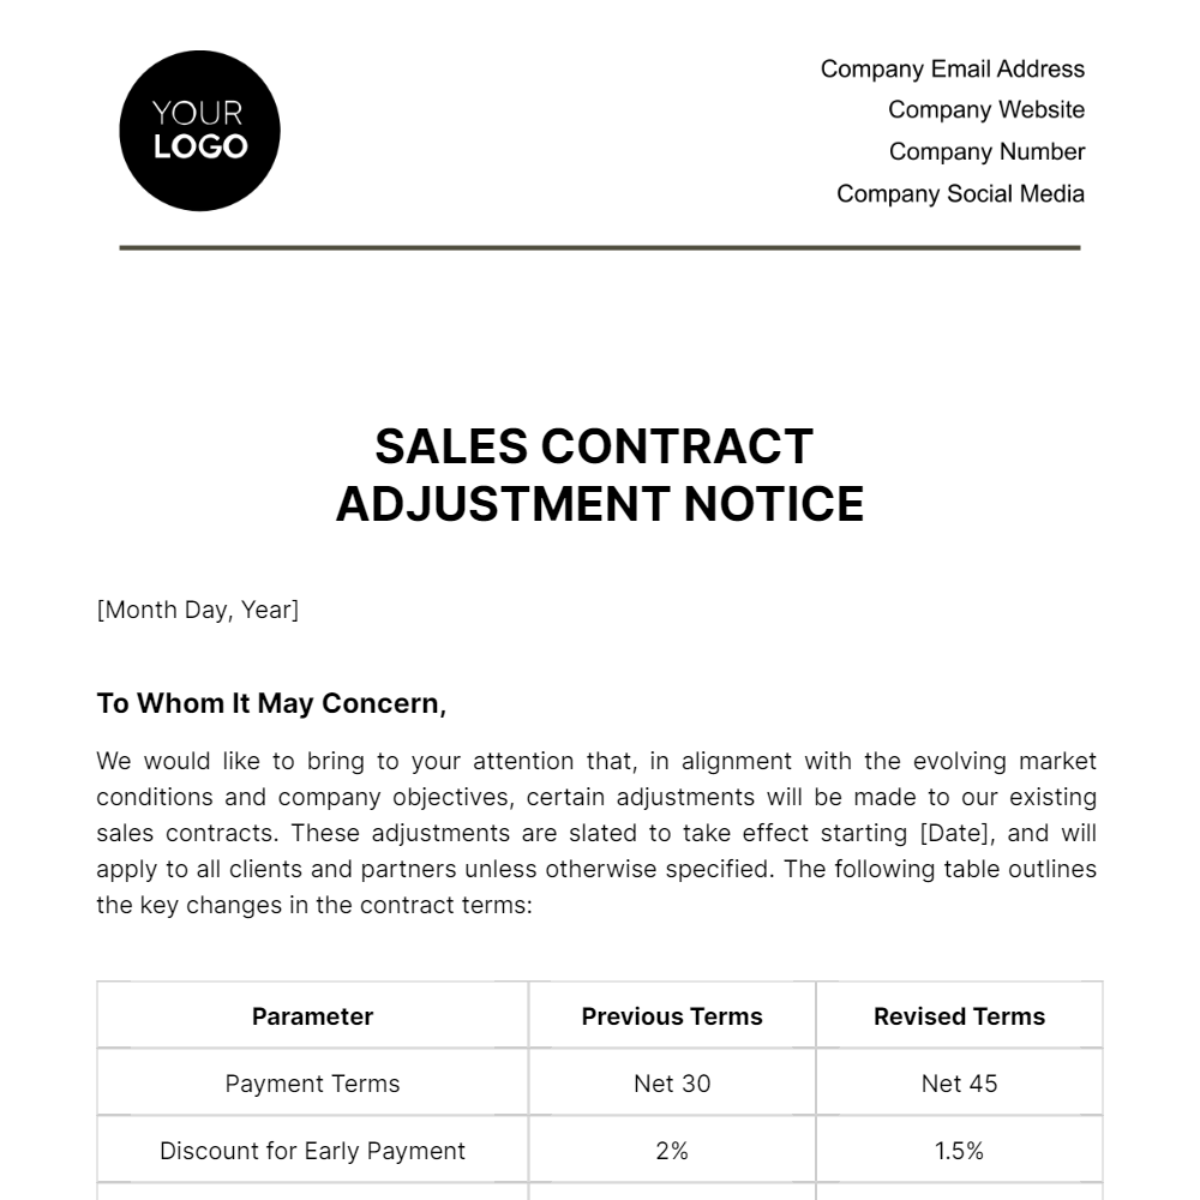 Sales Contract Adjustment Notice Template